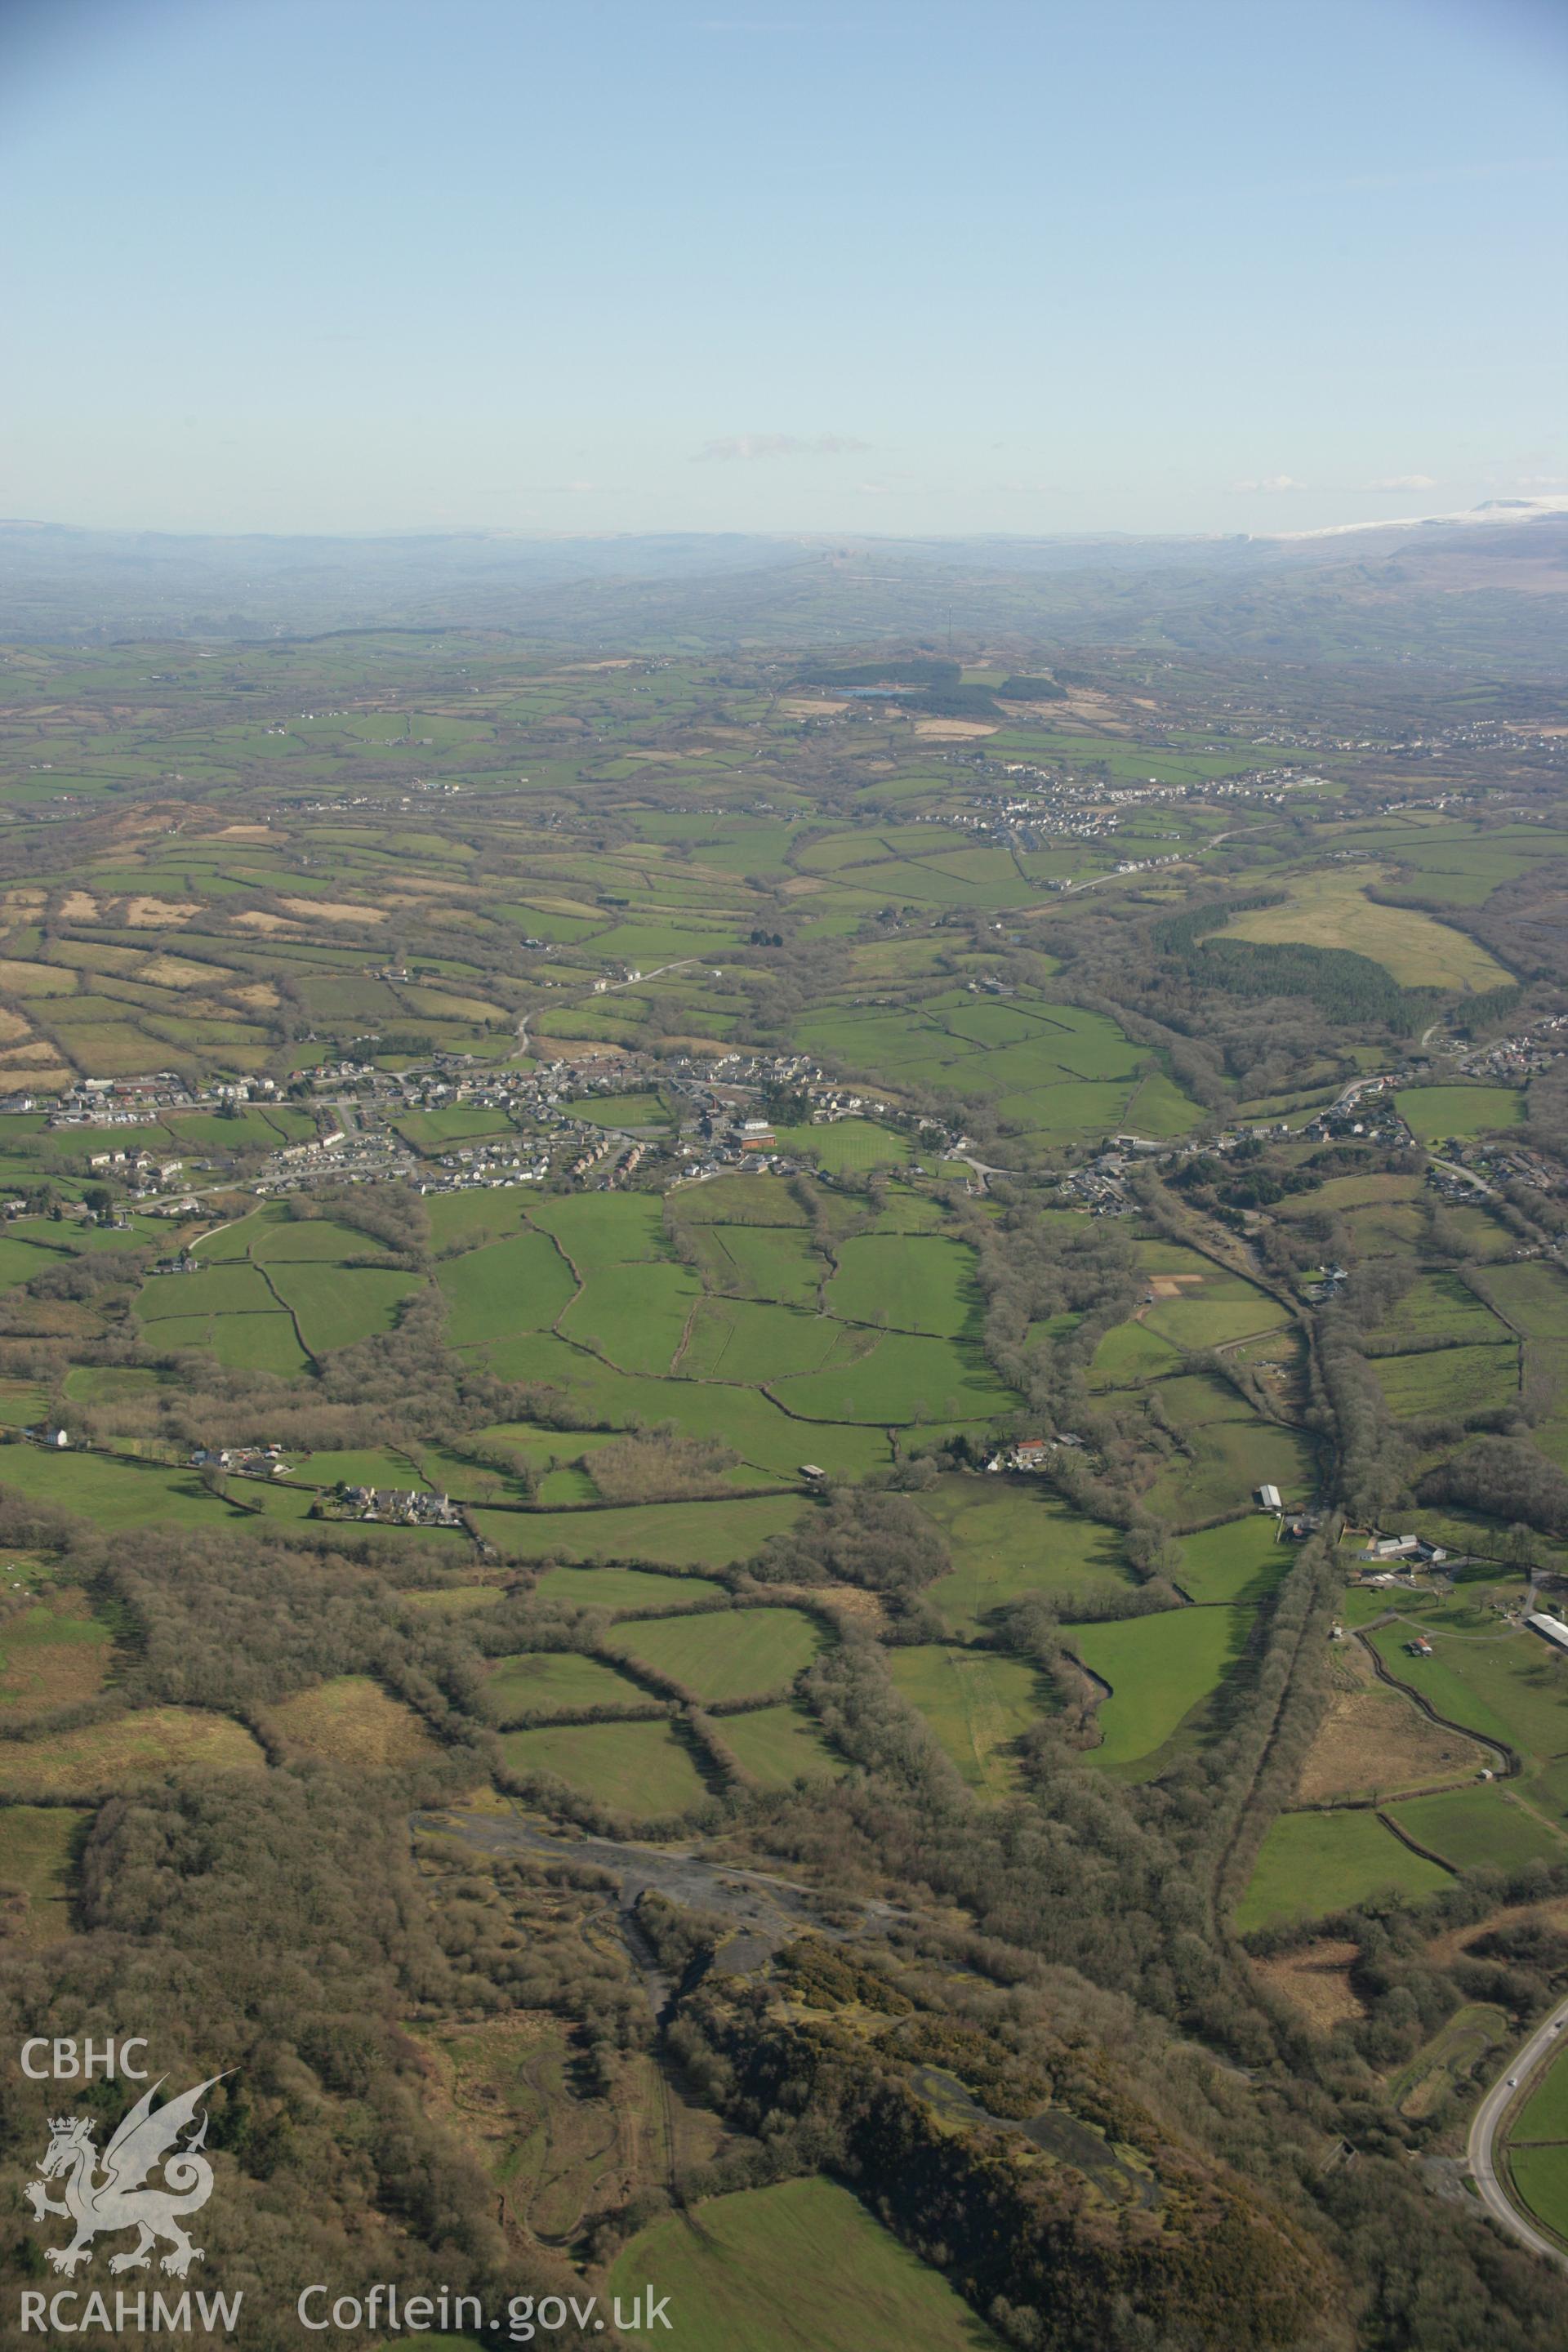 RCAHMW colour oblique aerial photograph of old coal levels at Maes Mawr, Pontyberem. Taken on 21 March 2007 by Toby Driver